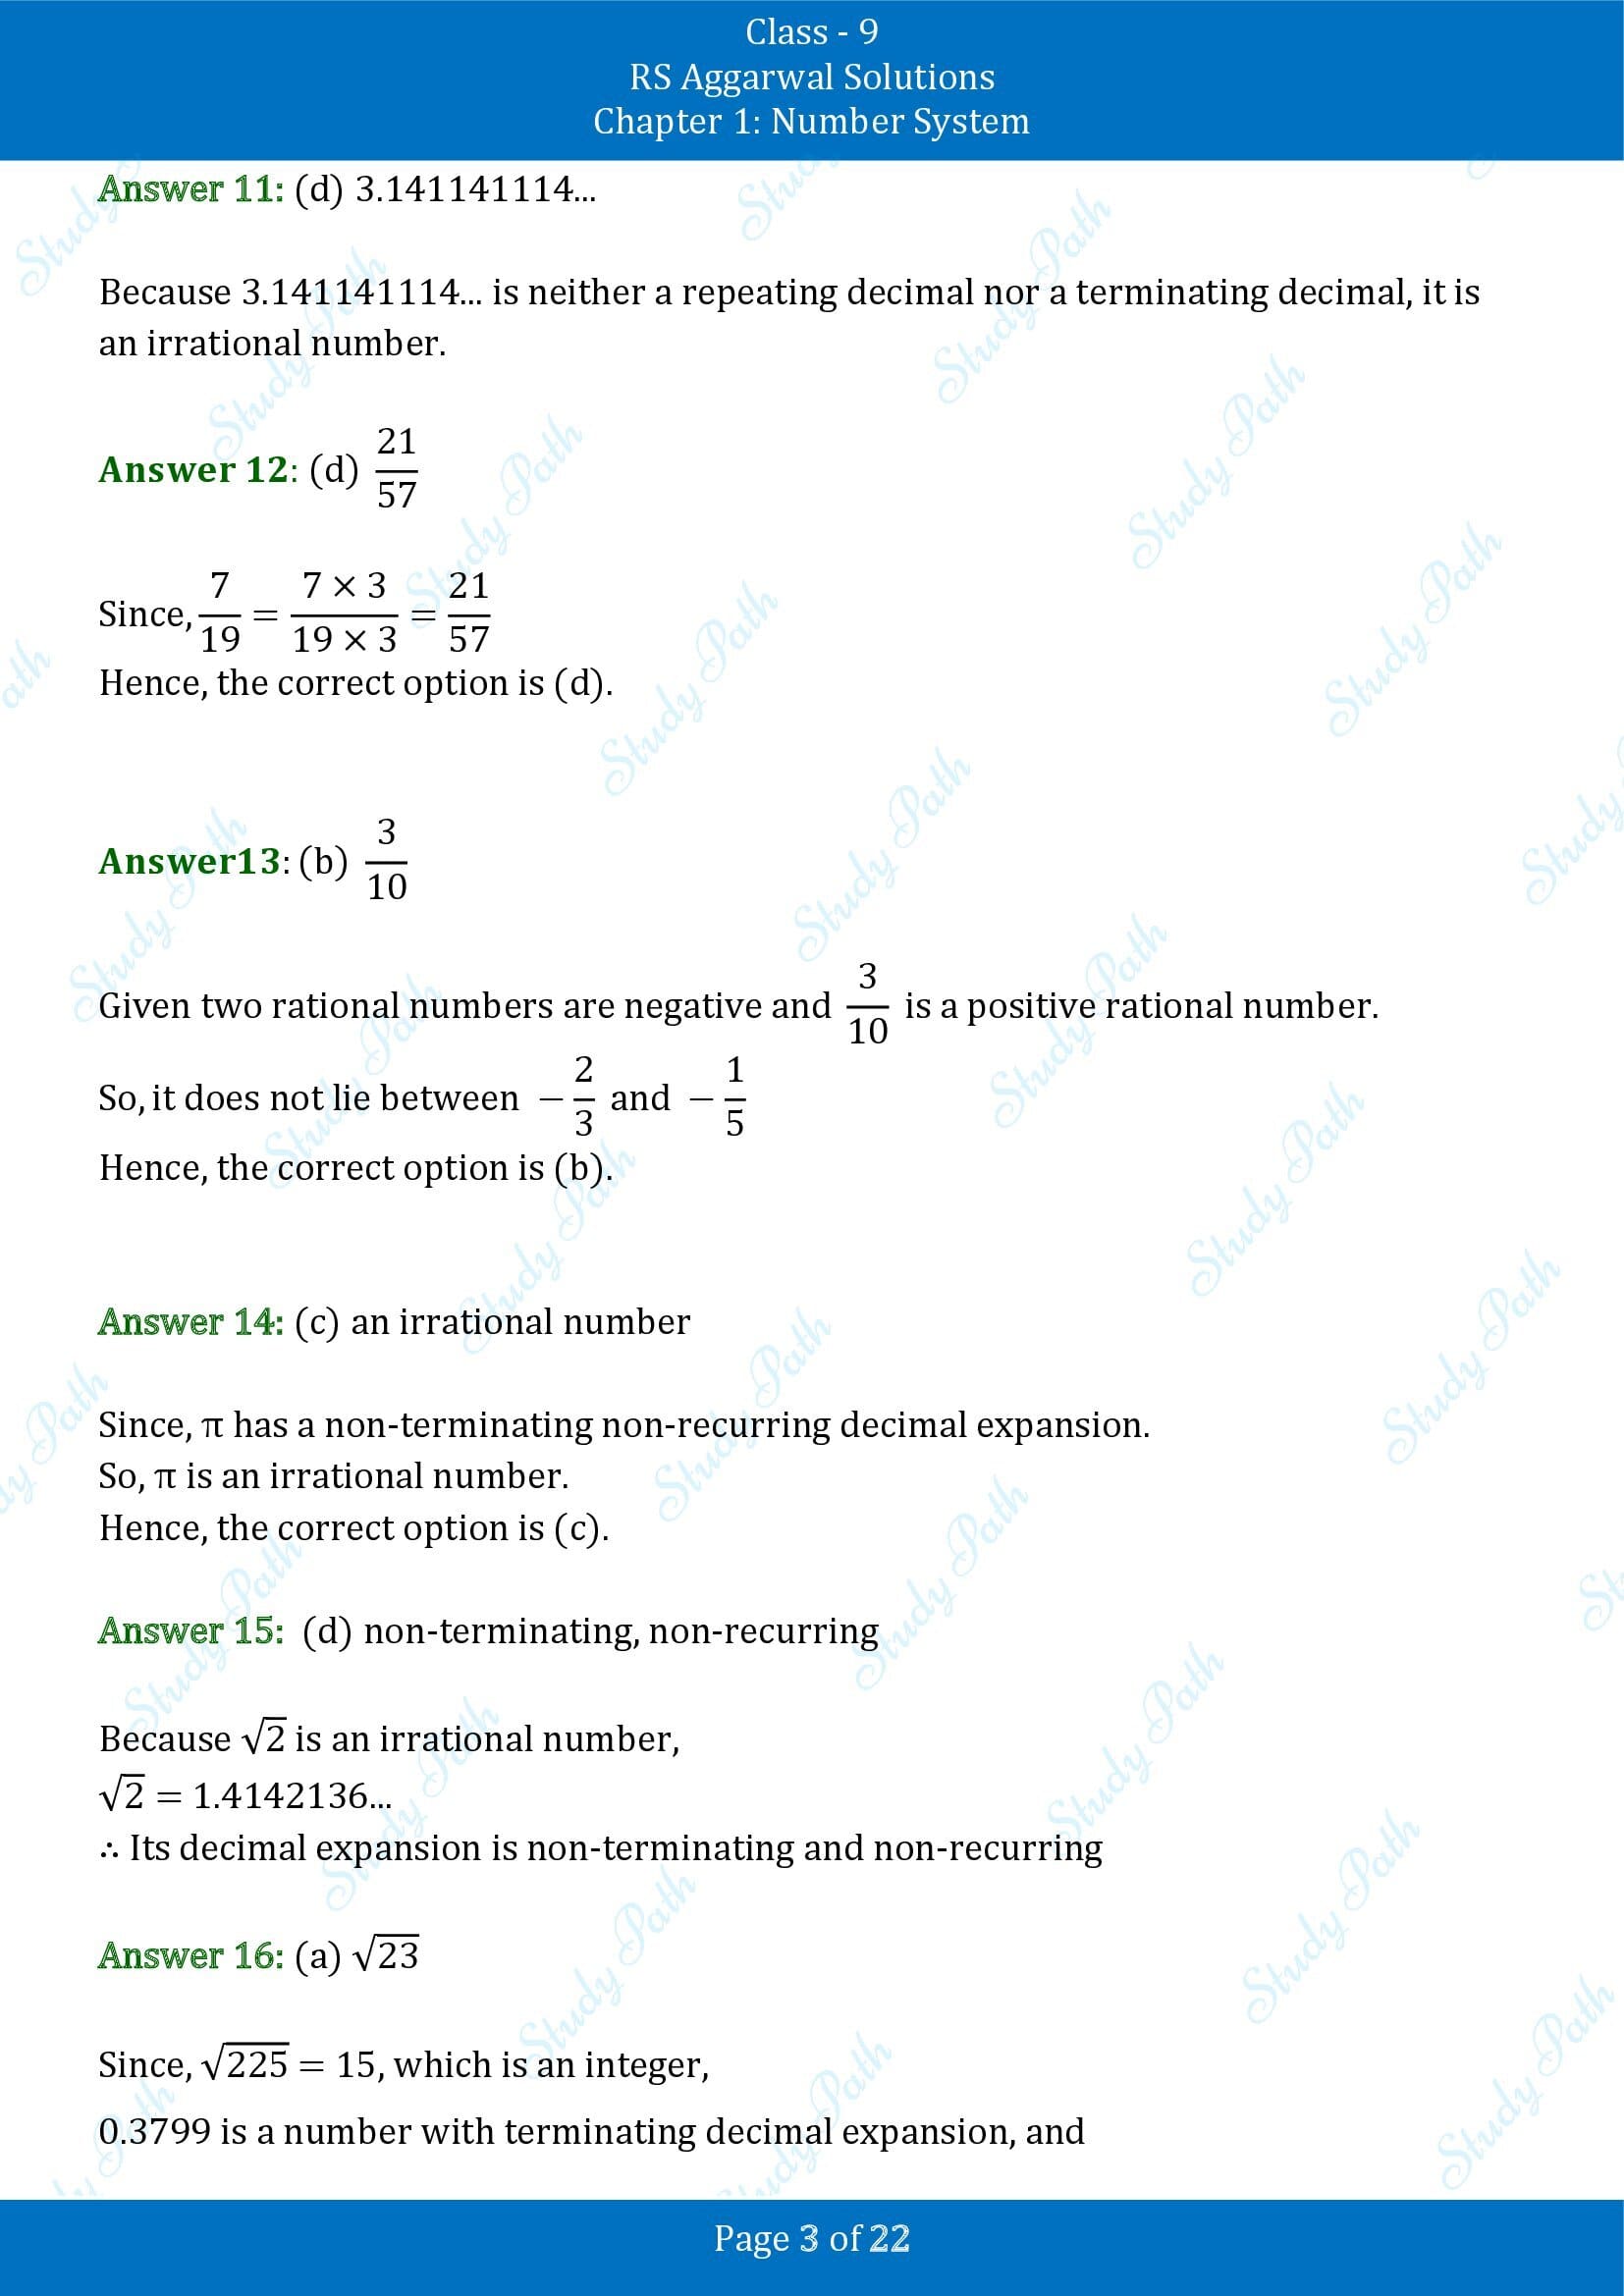 RS Aggarwal Solutions Class 9 Chapter 1 Number System Multiple Choice Questions MCQs 00003